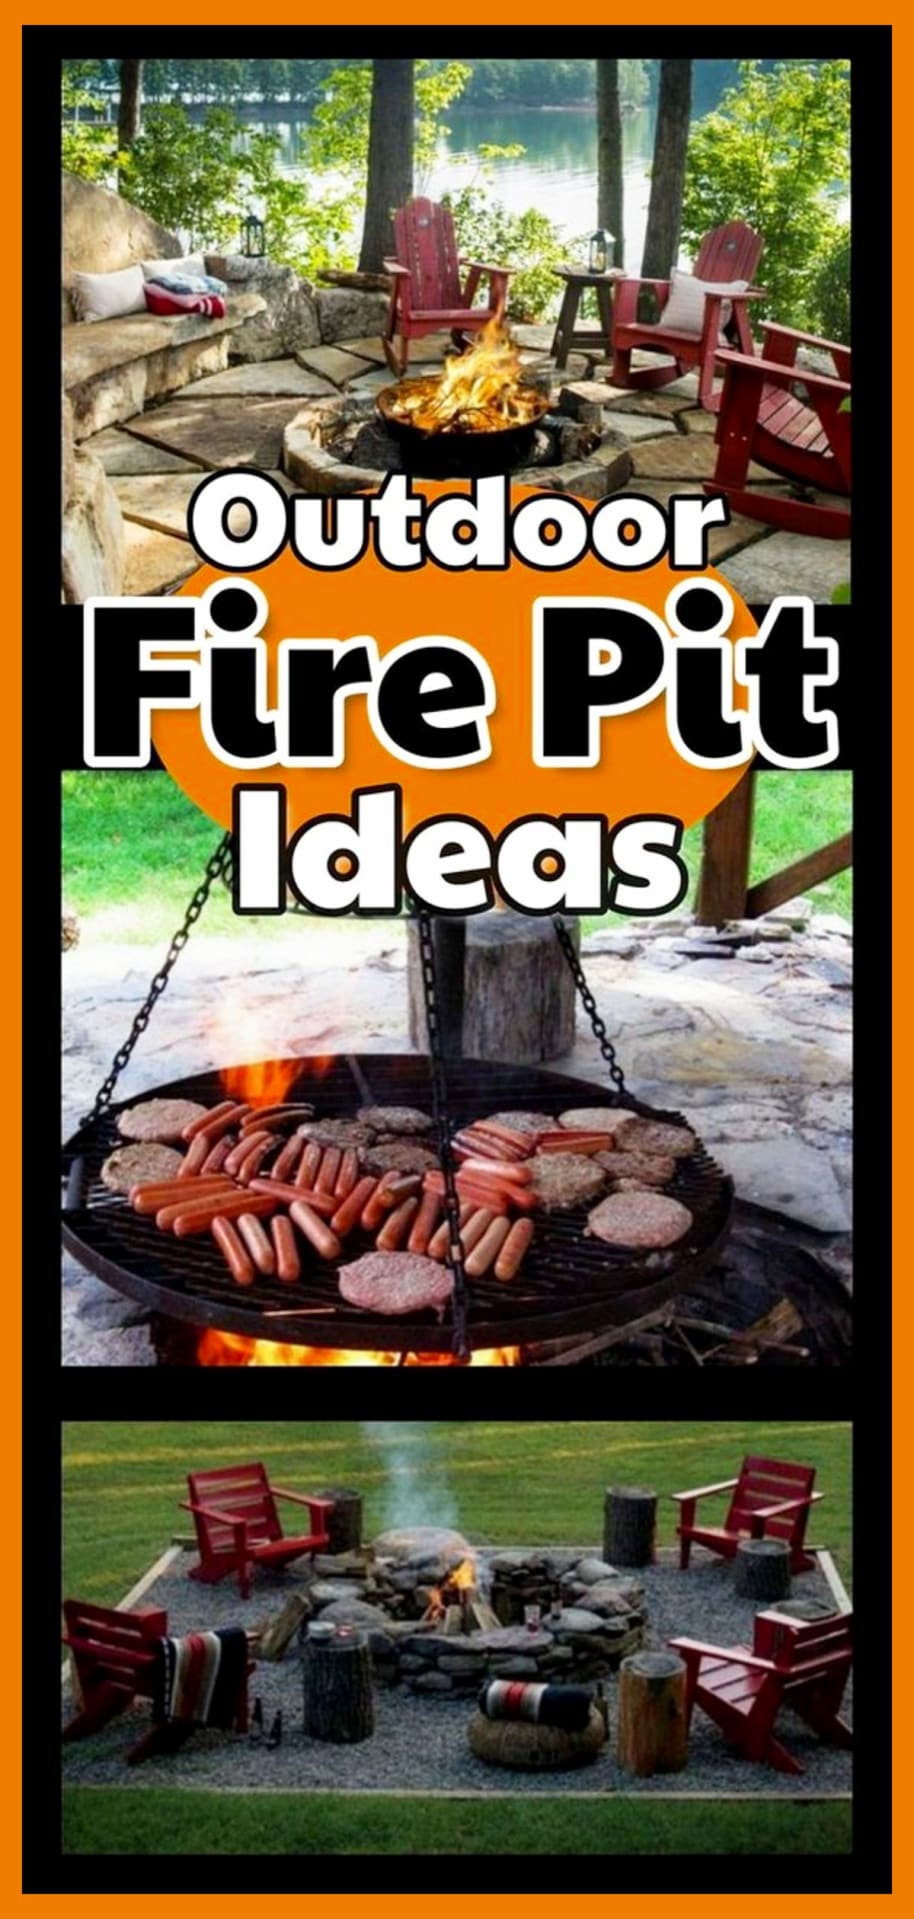 Fire pit ideas - Backyard fire pit ideas on a budget - cheap and easy DIY fire pit designs, seating and more ideas for your own backyard fire pit